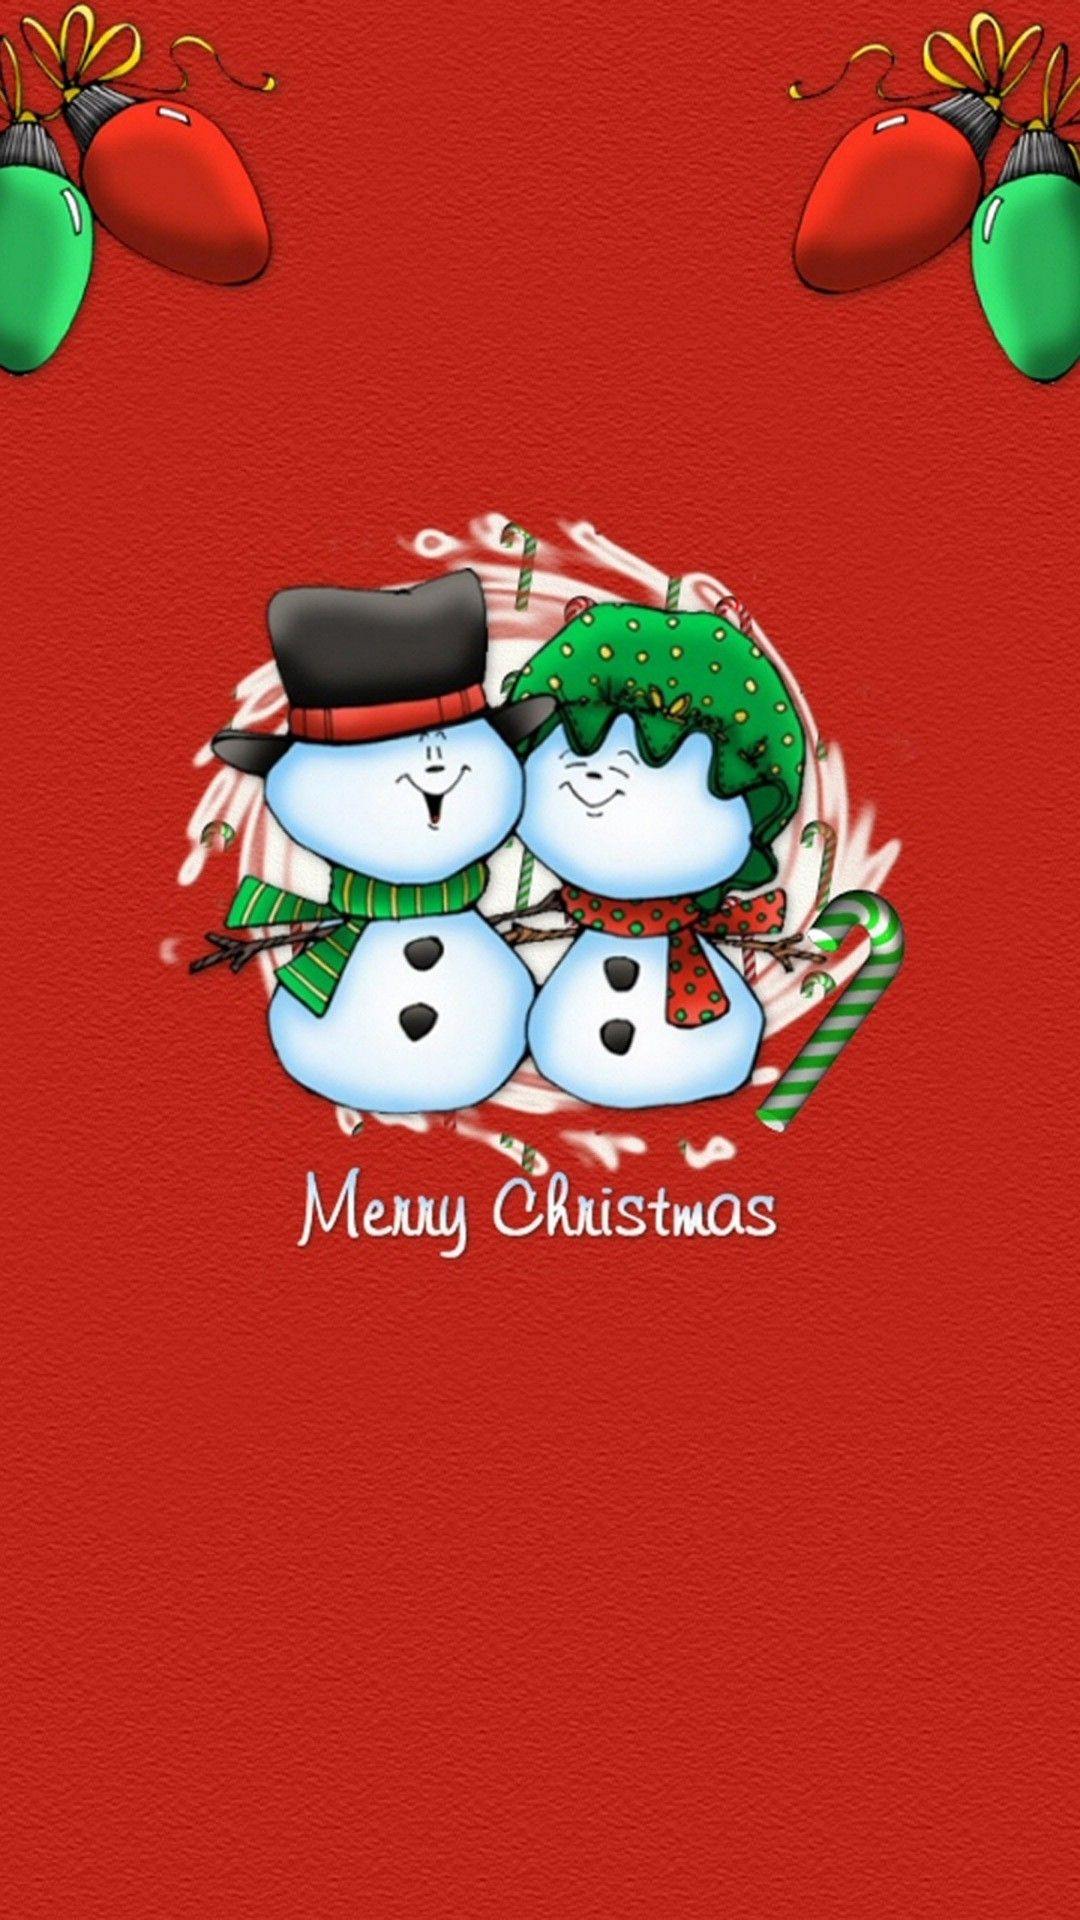 Christmas HD Wallpaper for iPhone 7